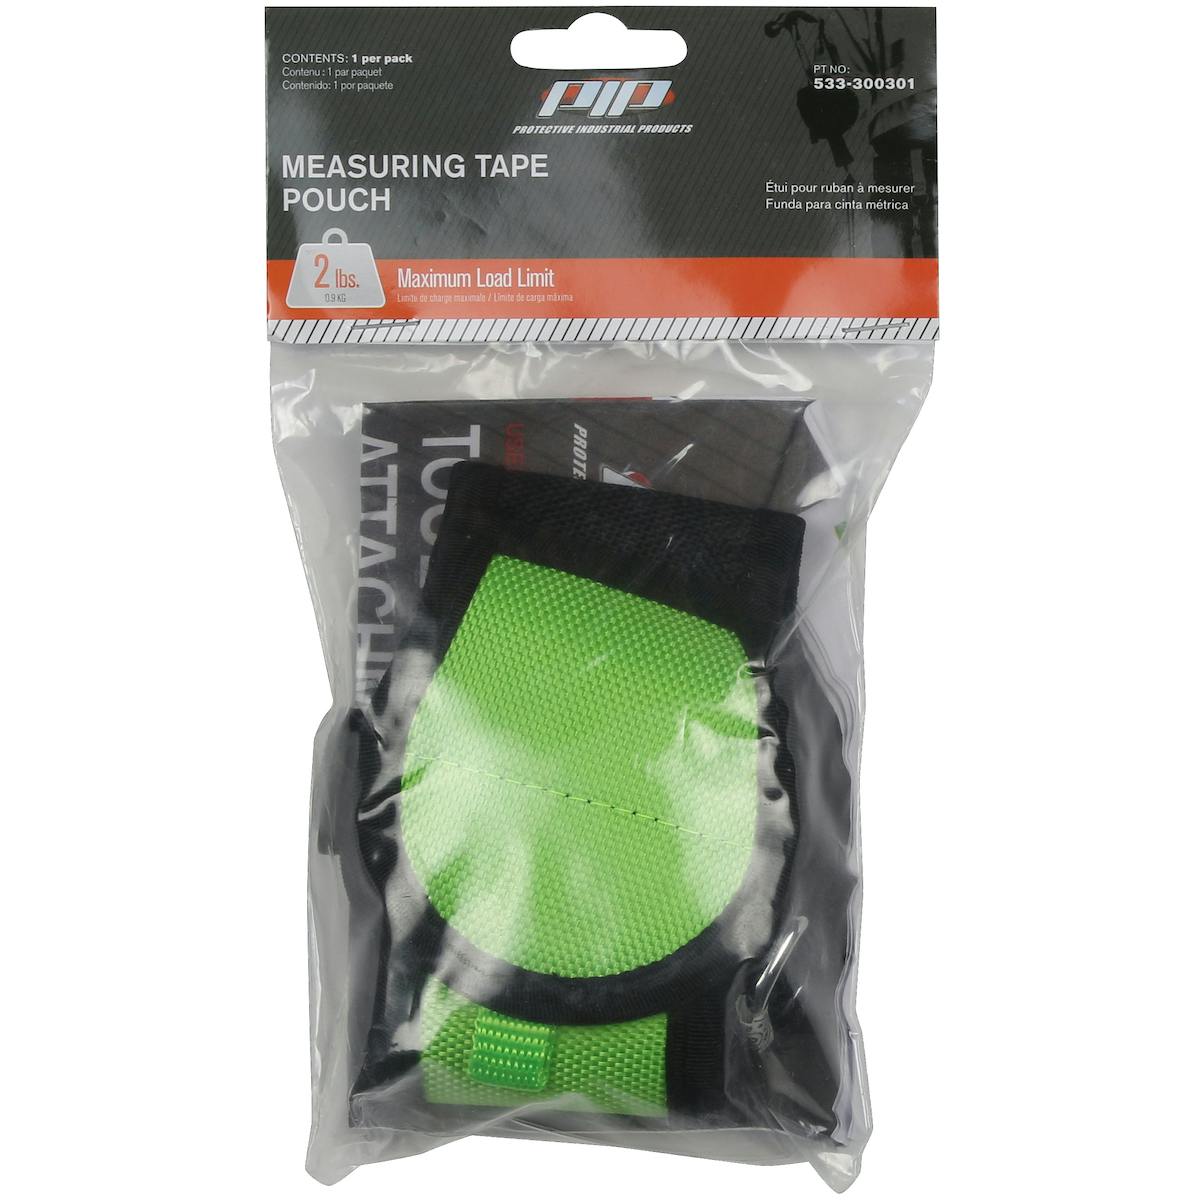 Measuring Tape Pouch - 2 lbs. maximum load limit - Retail Packaged, Lime (533-300301) - OS